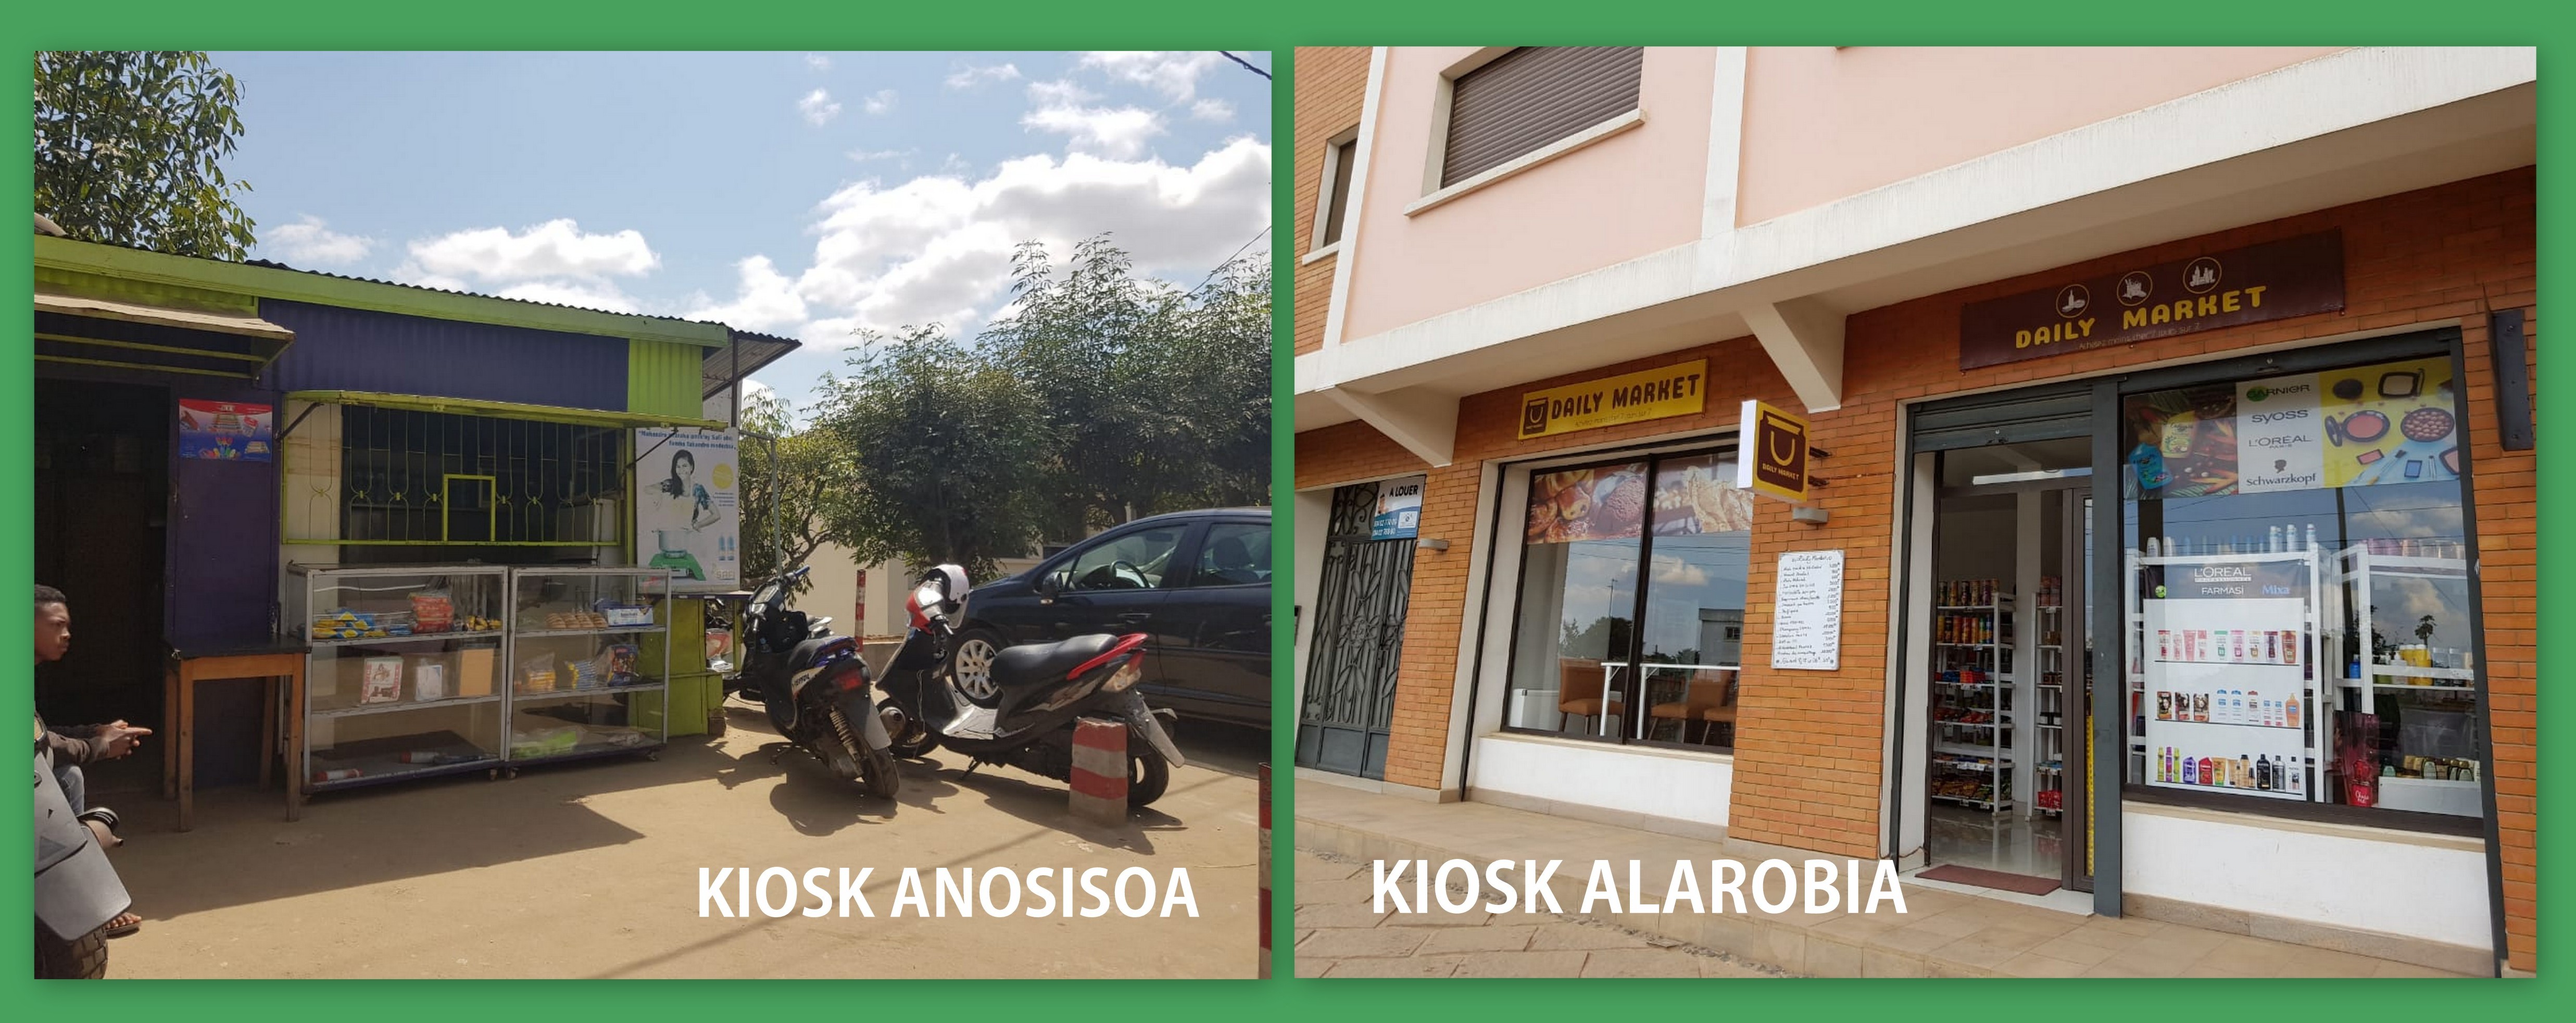 Ethanol is available in Antananarivo in two new kiosks